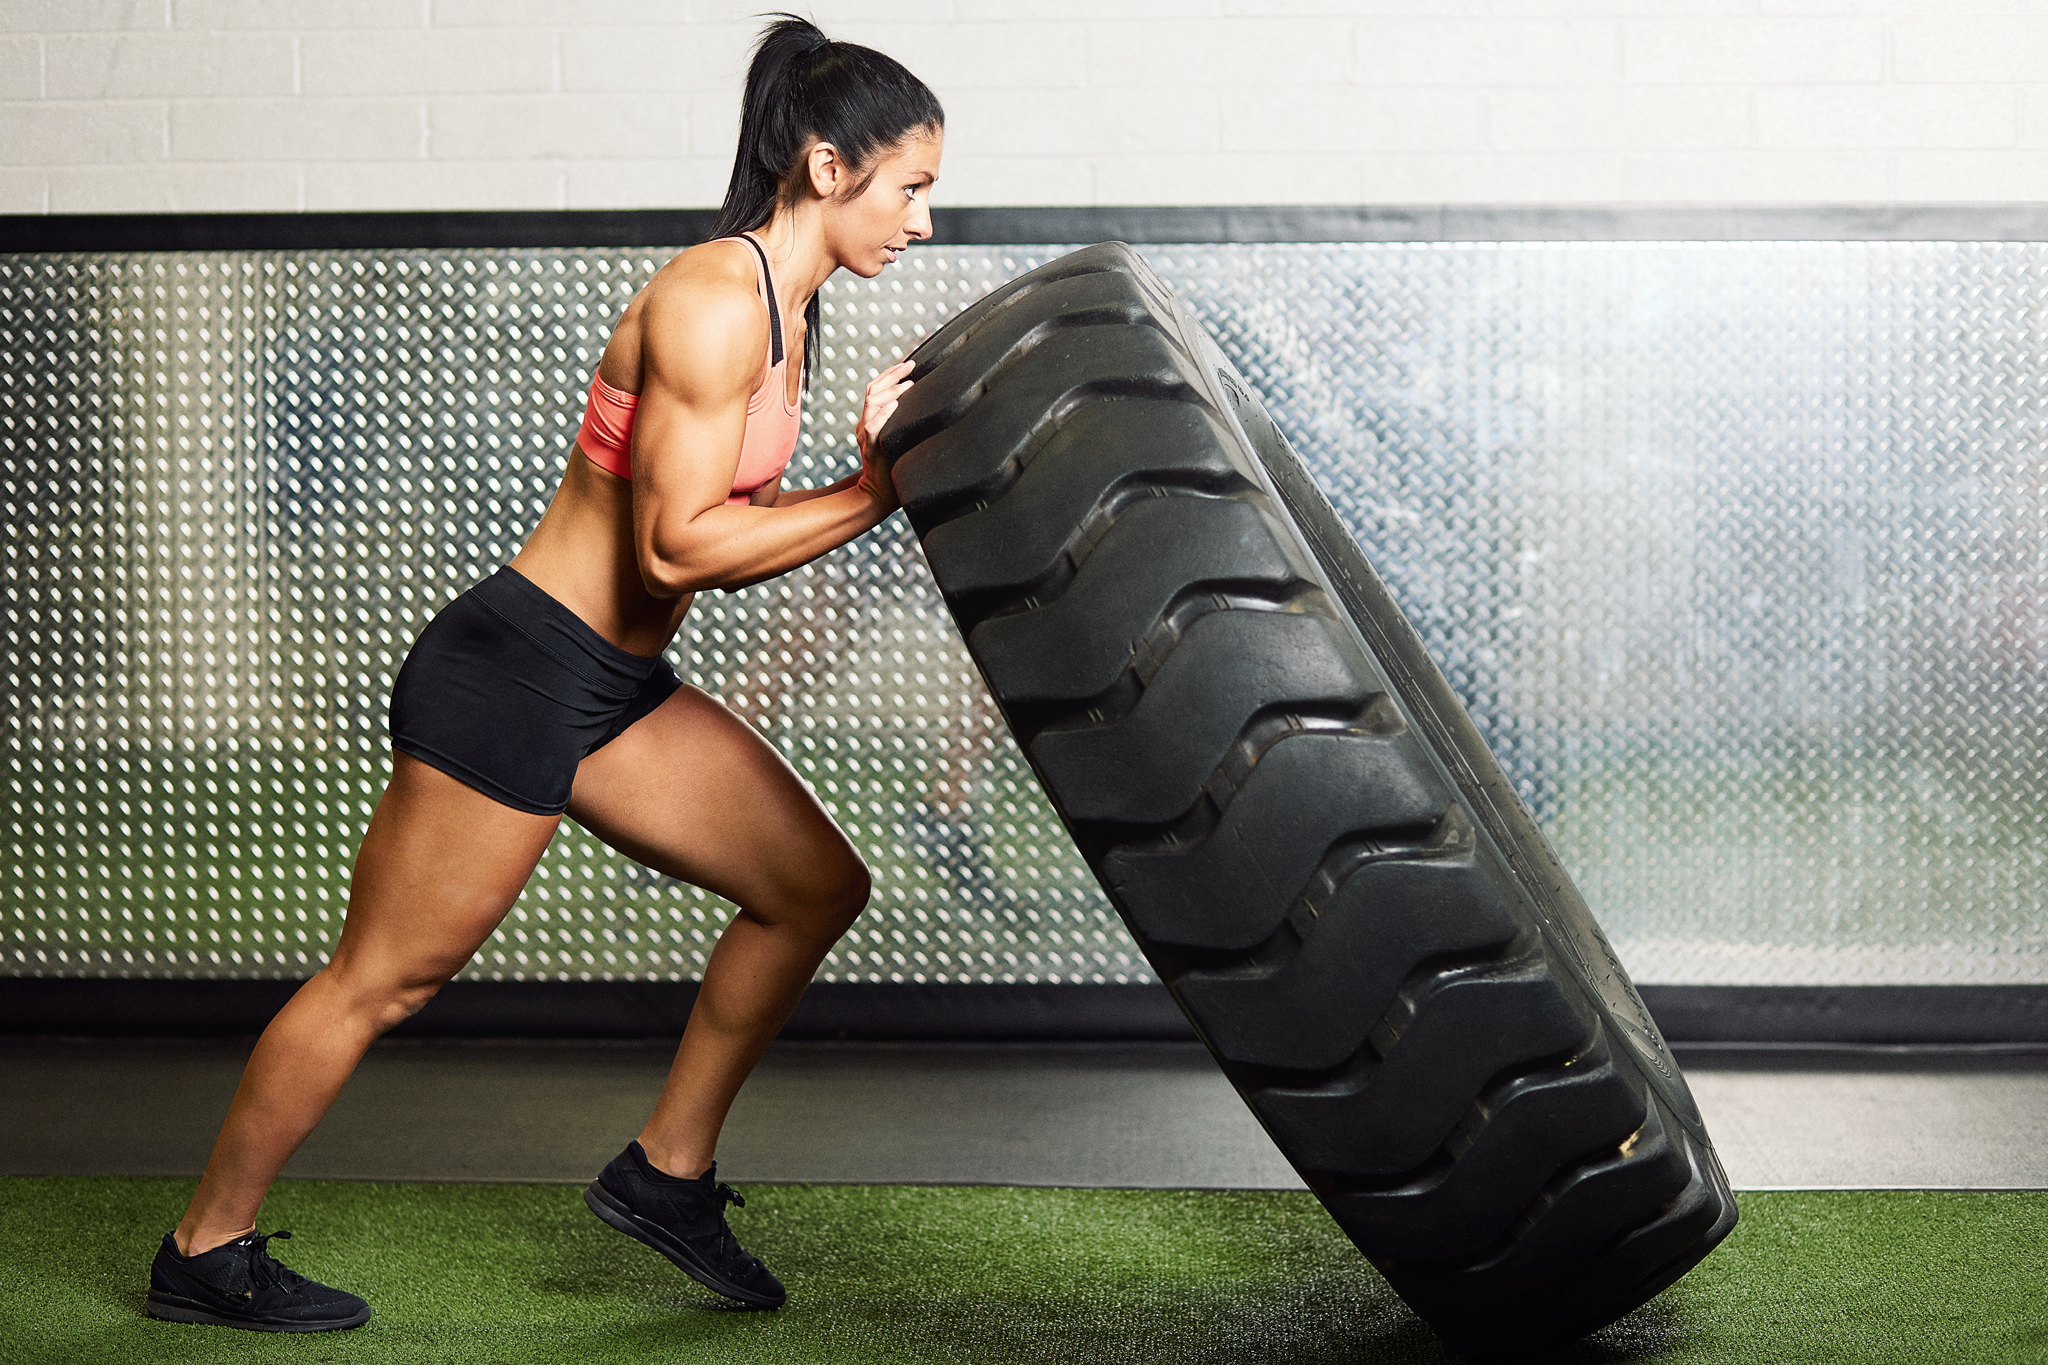 Fitness Competitor Photoshoot - tire flips - April Bleicher